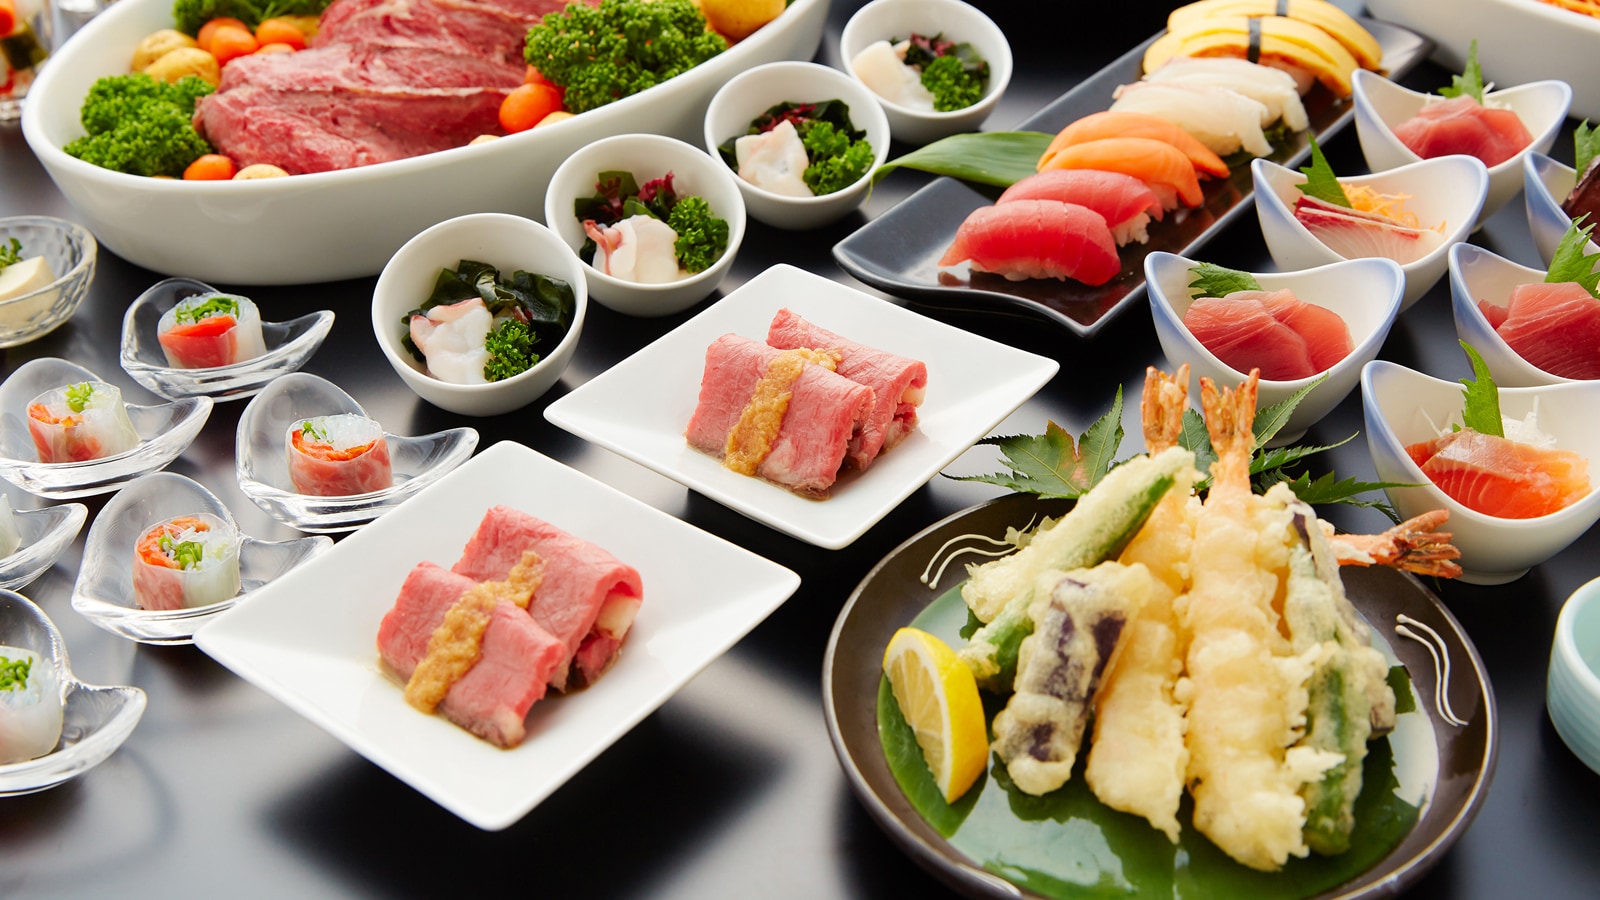 About 50 kinds of premium buffet. All-you-can-eat sushi, tempura, and sweets